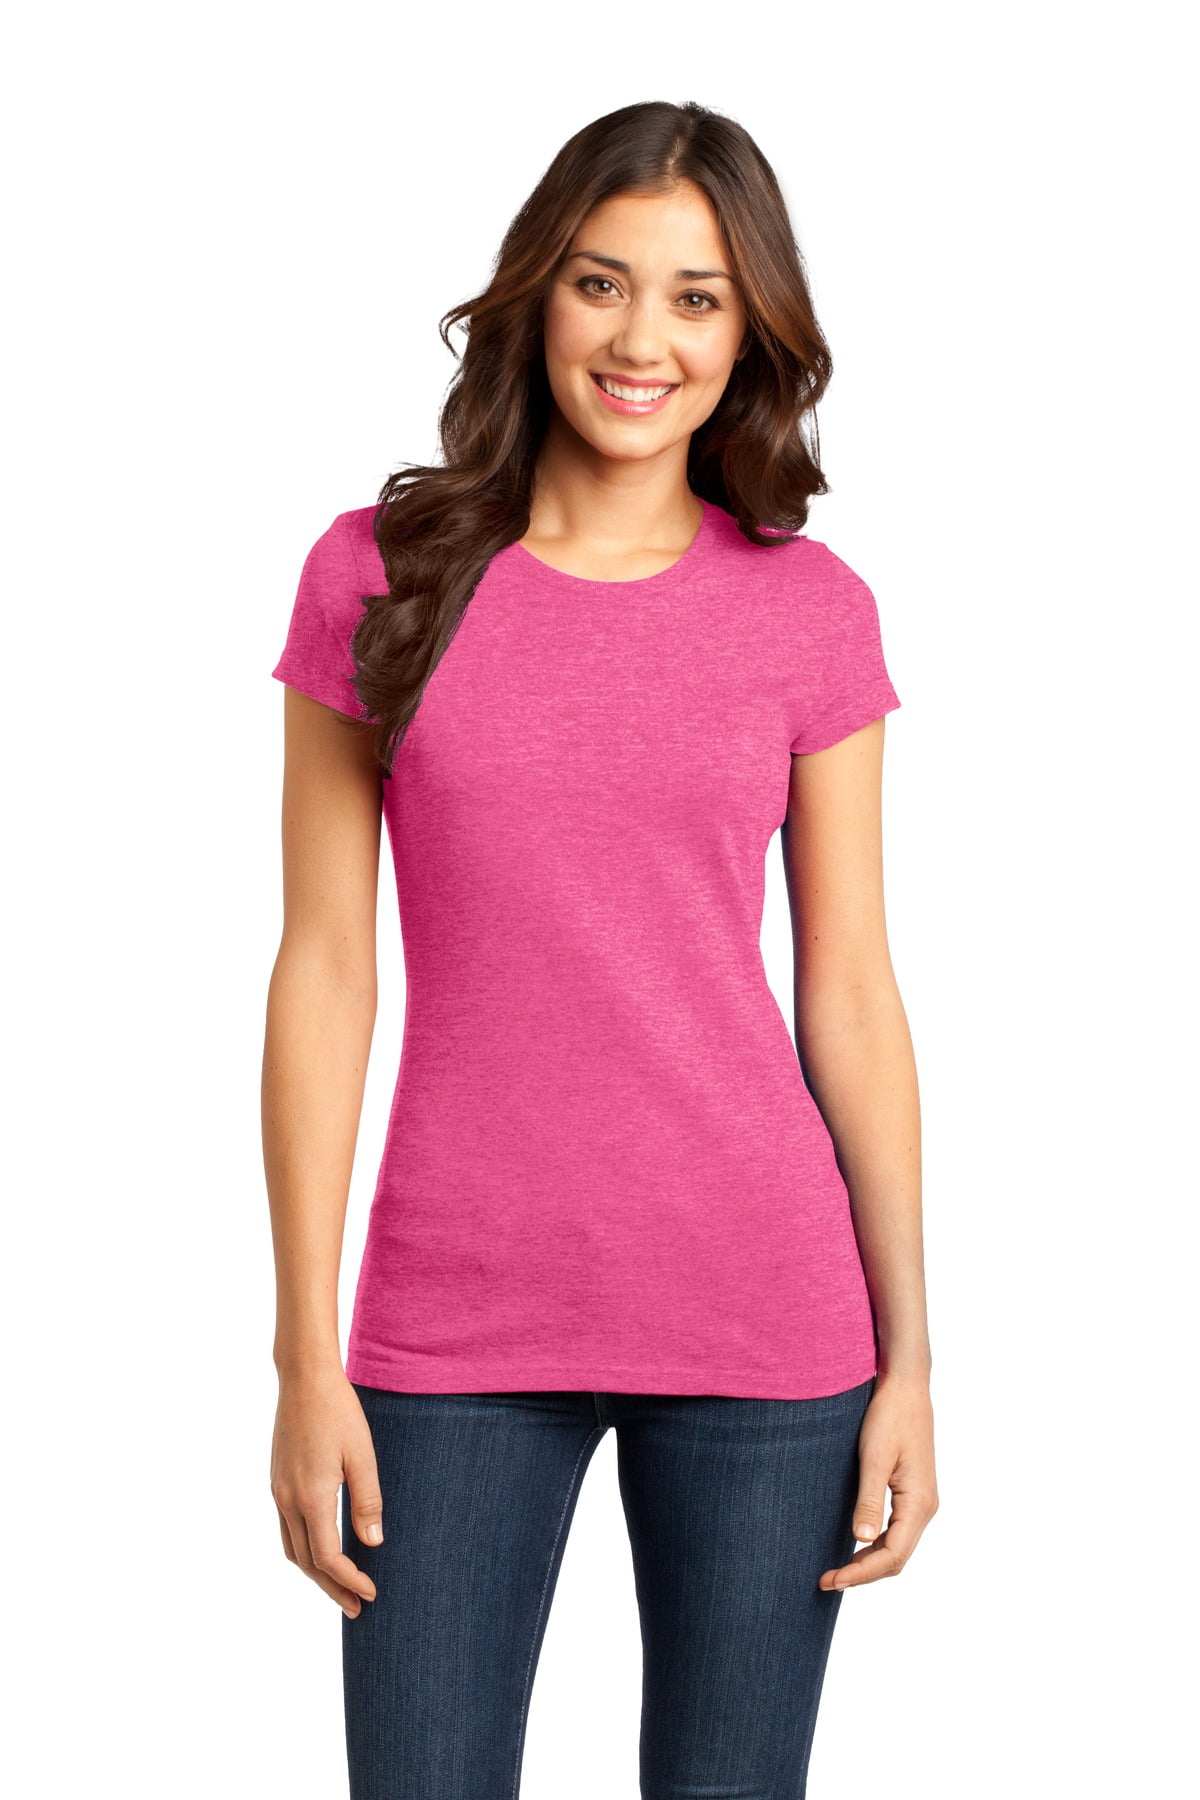 District DT6001 Juniors Very Important Tee , Fuchsia Frost, XL